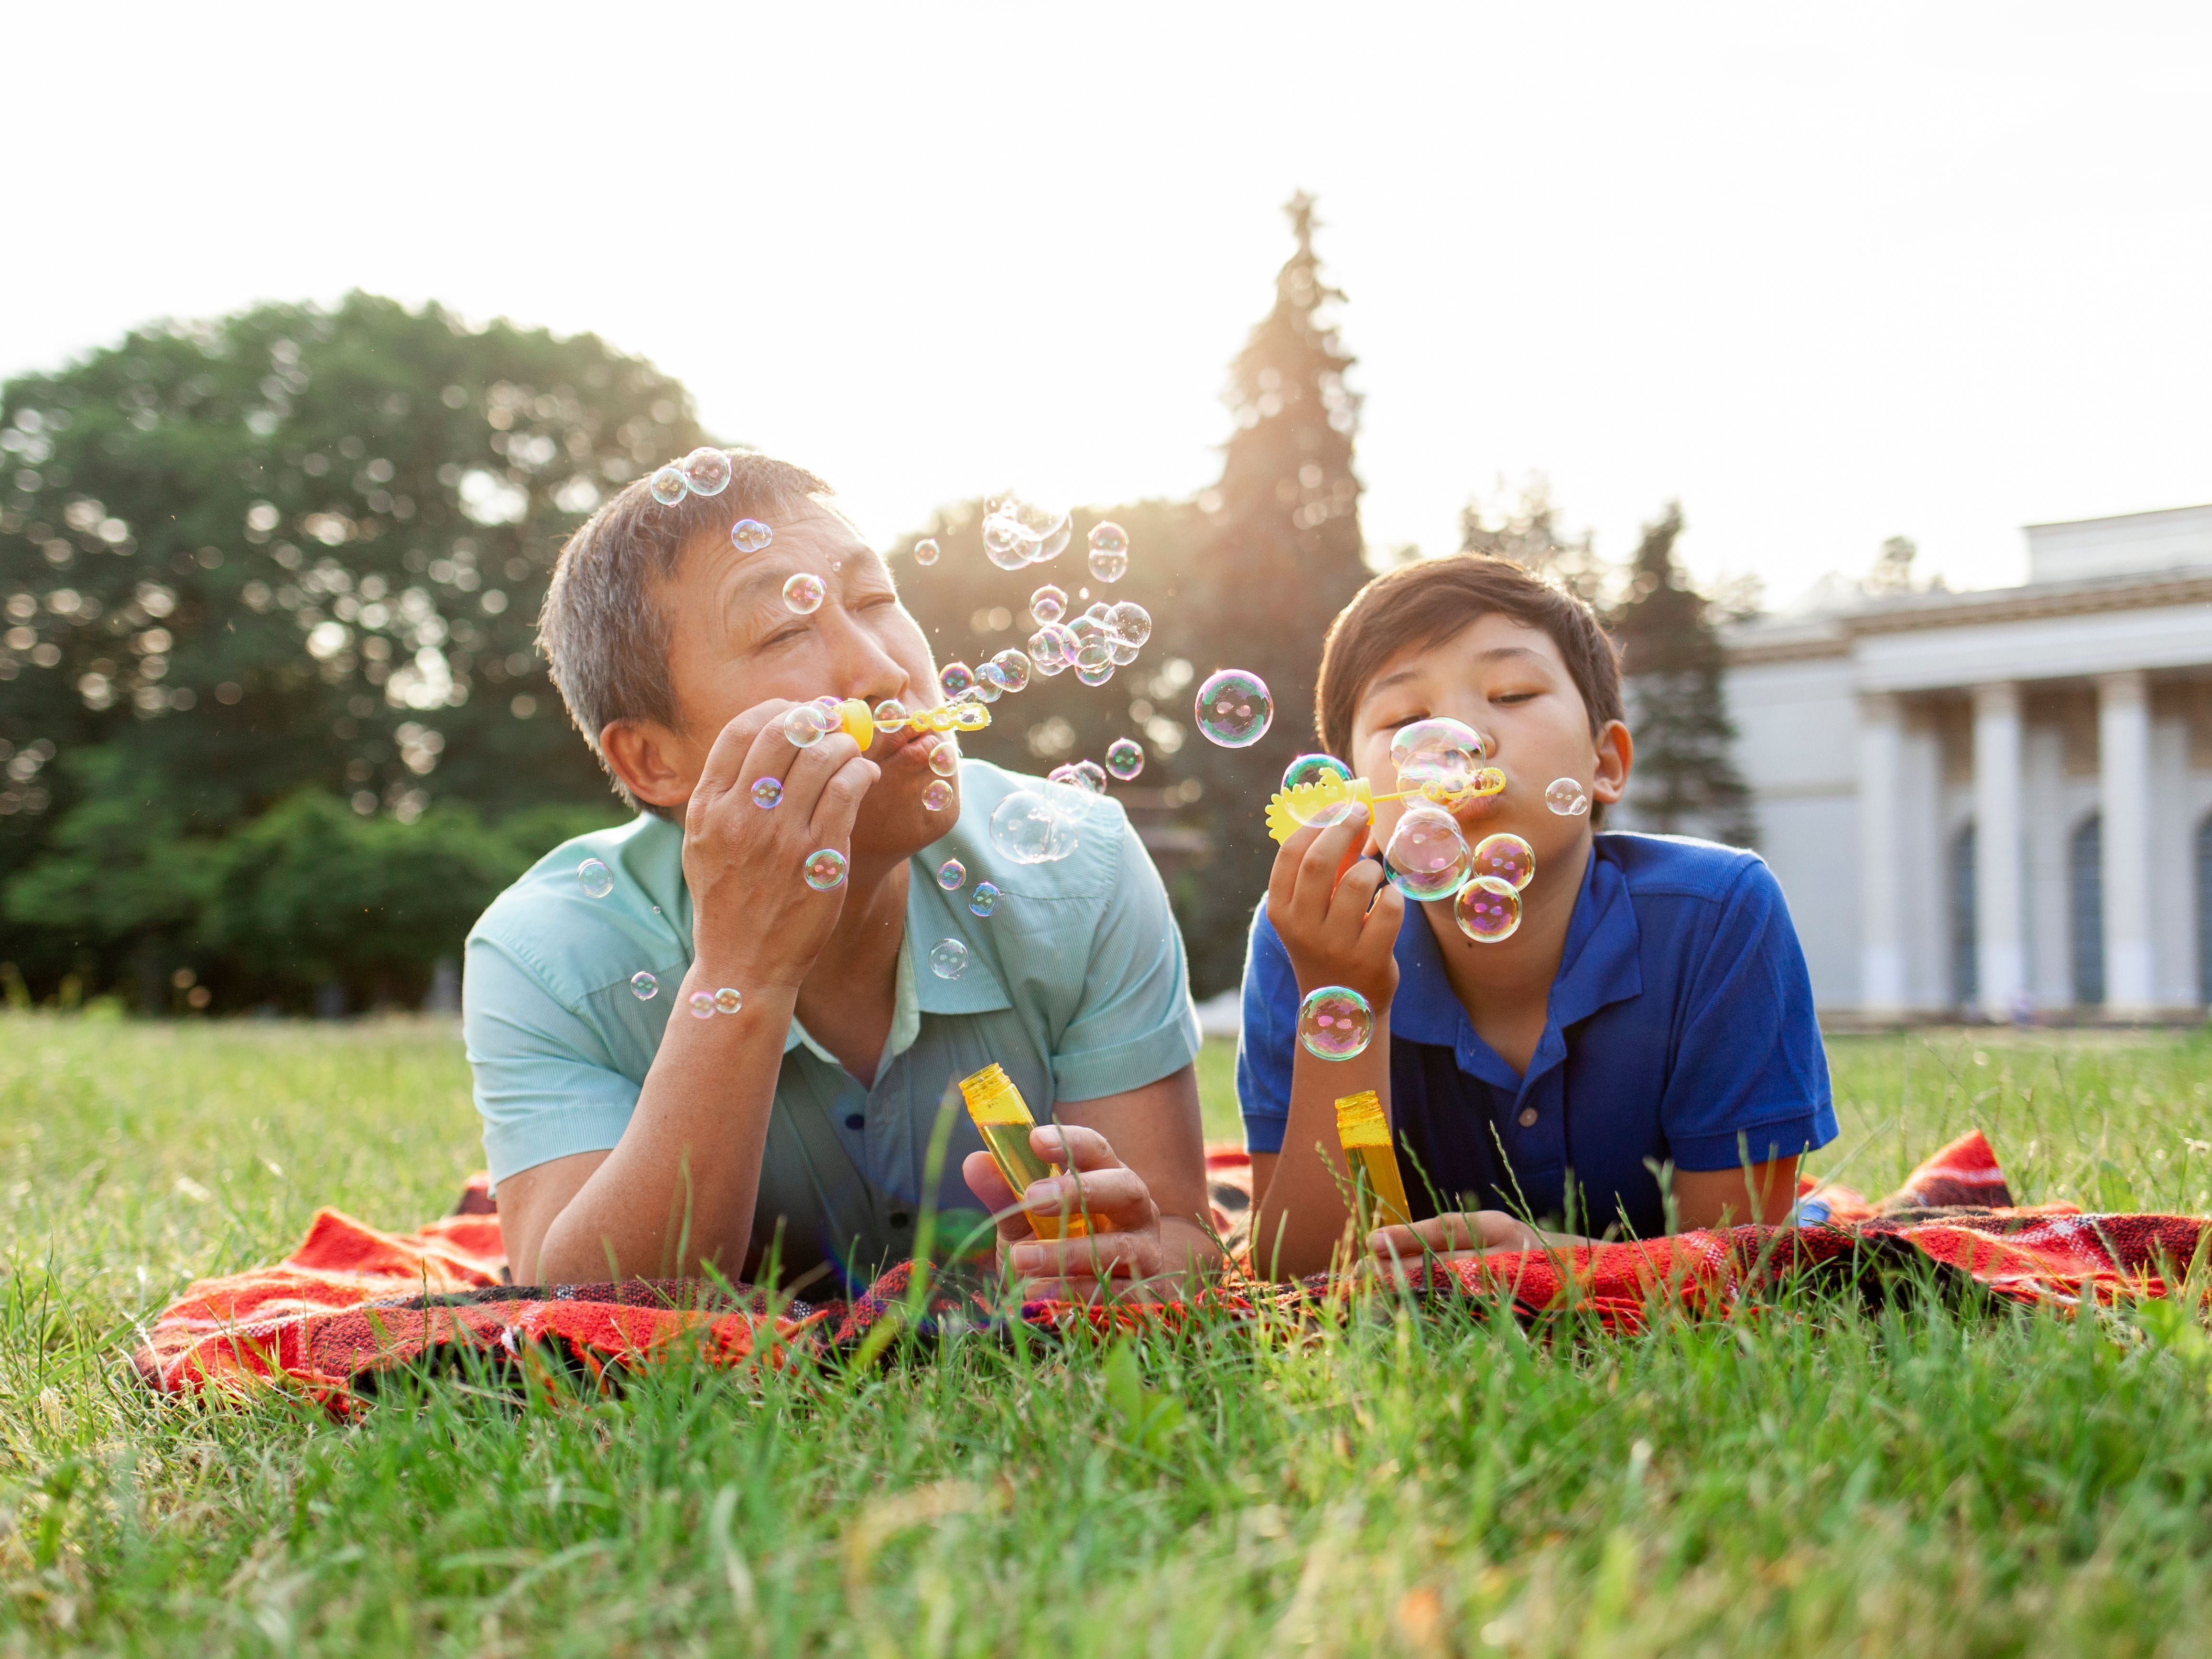 father and son blowing bubbles in grass